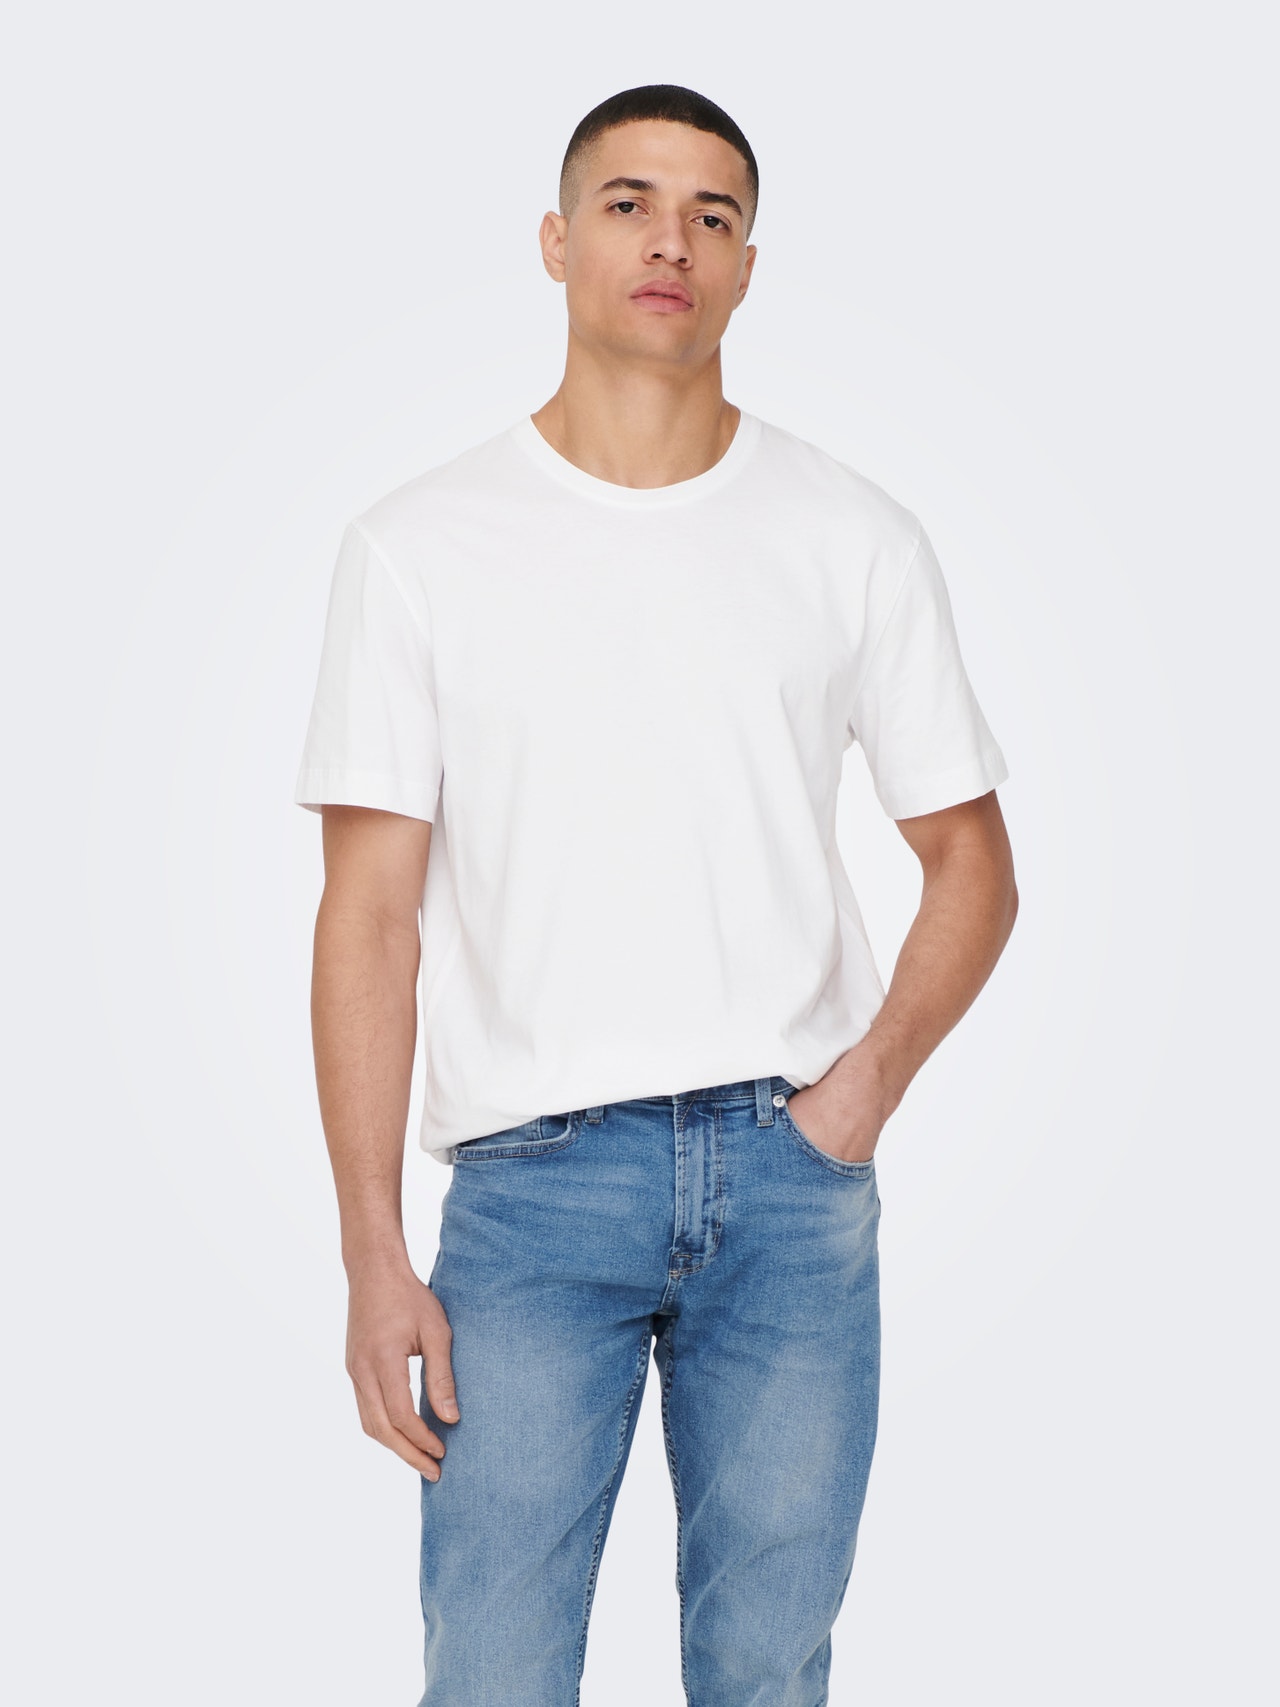 ONLY & SONS Regular Fit Round Neck T-Shirt -White - 22025208